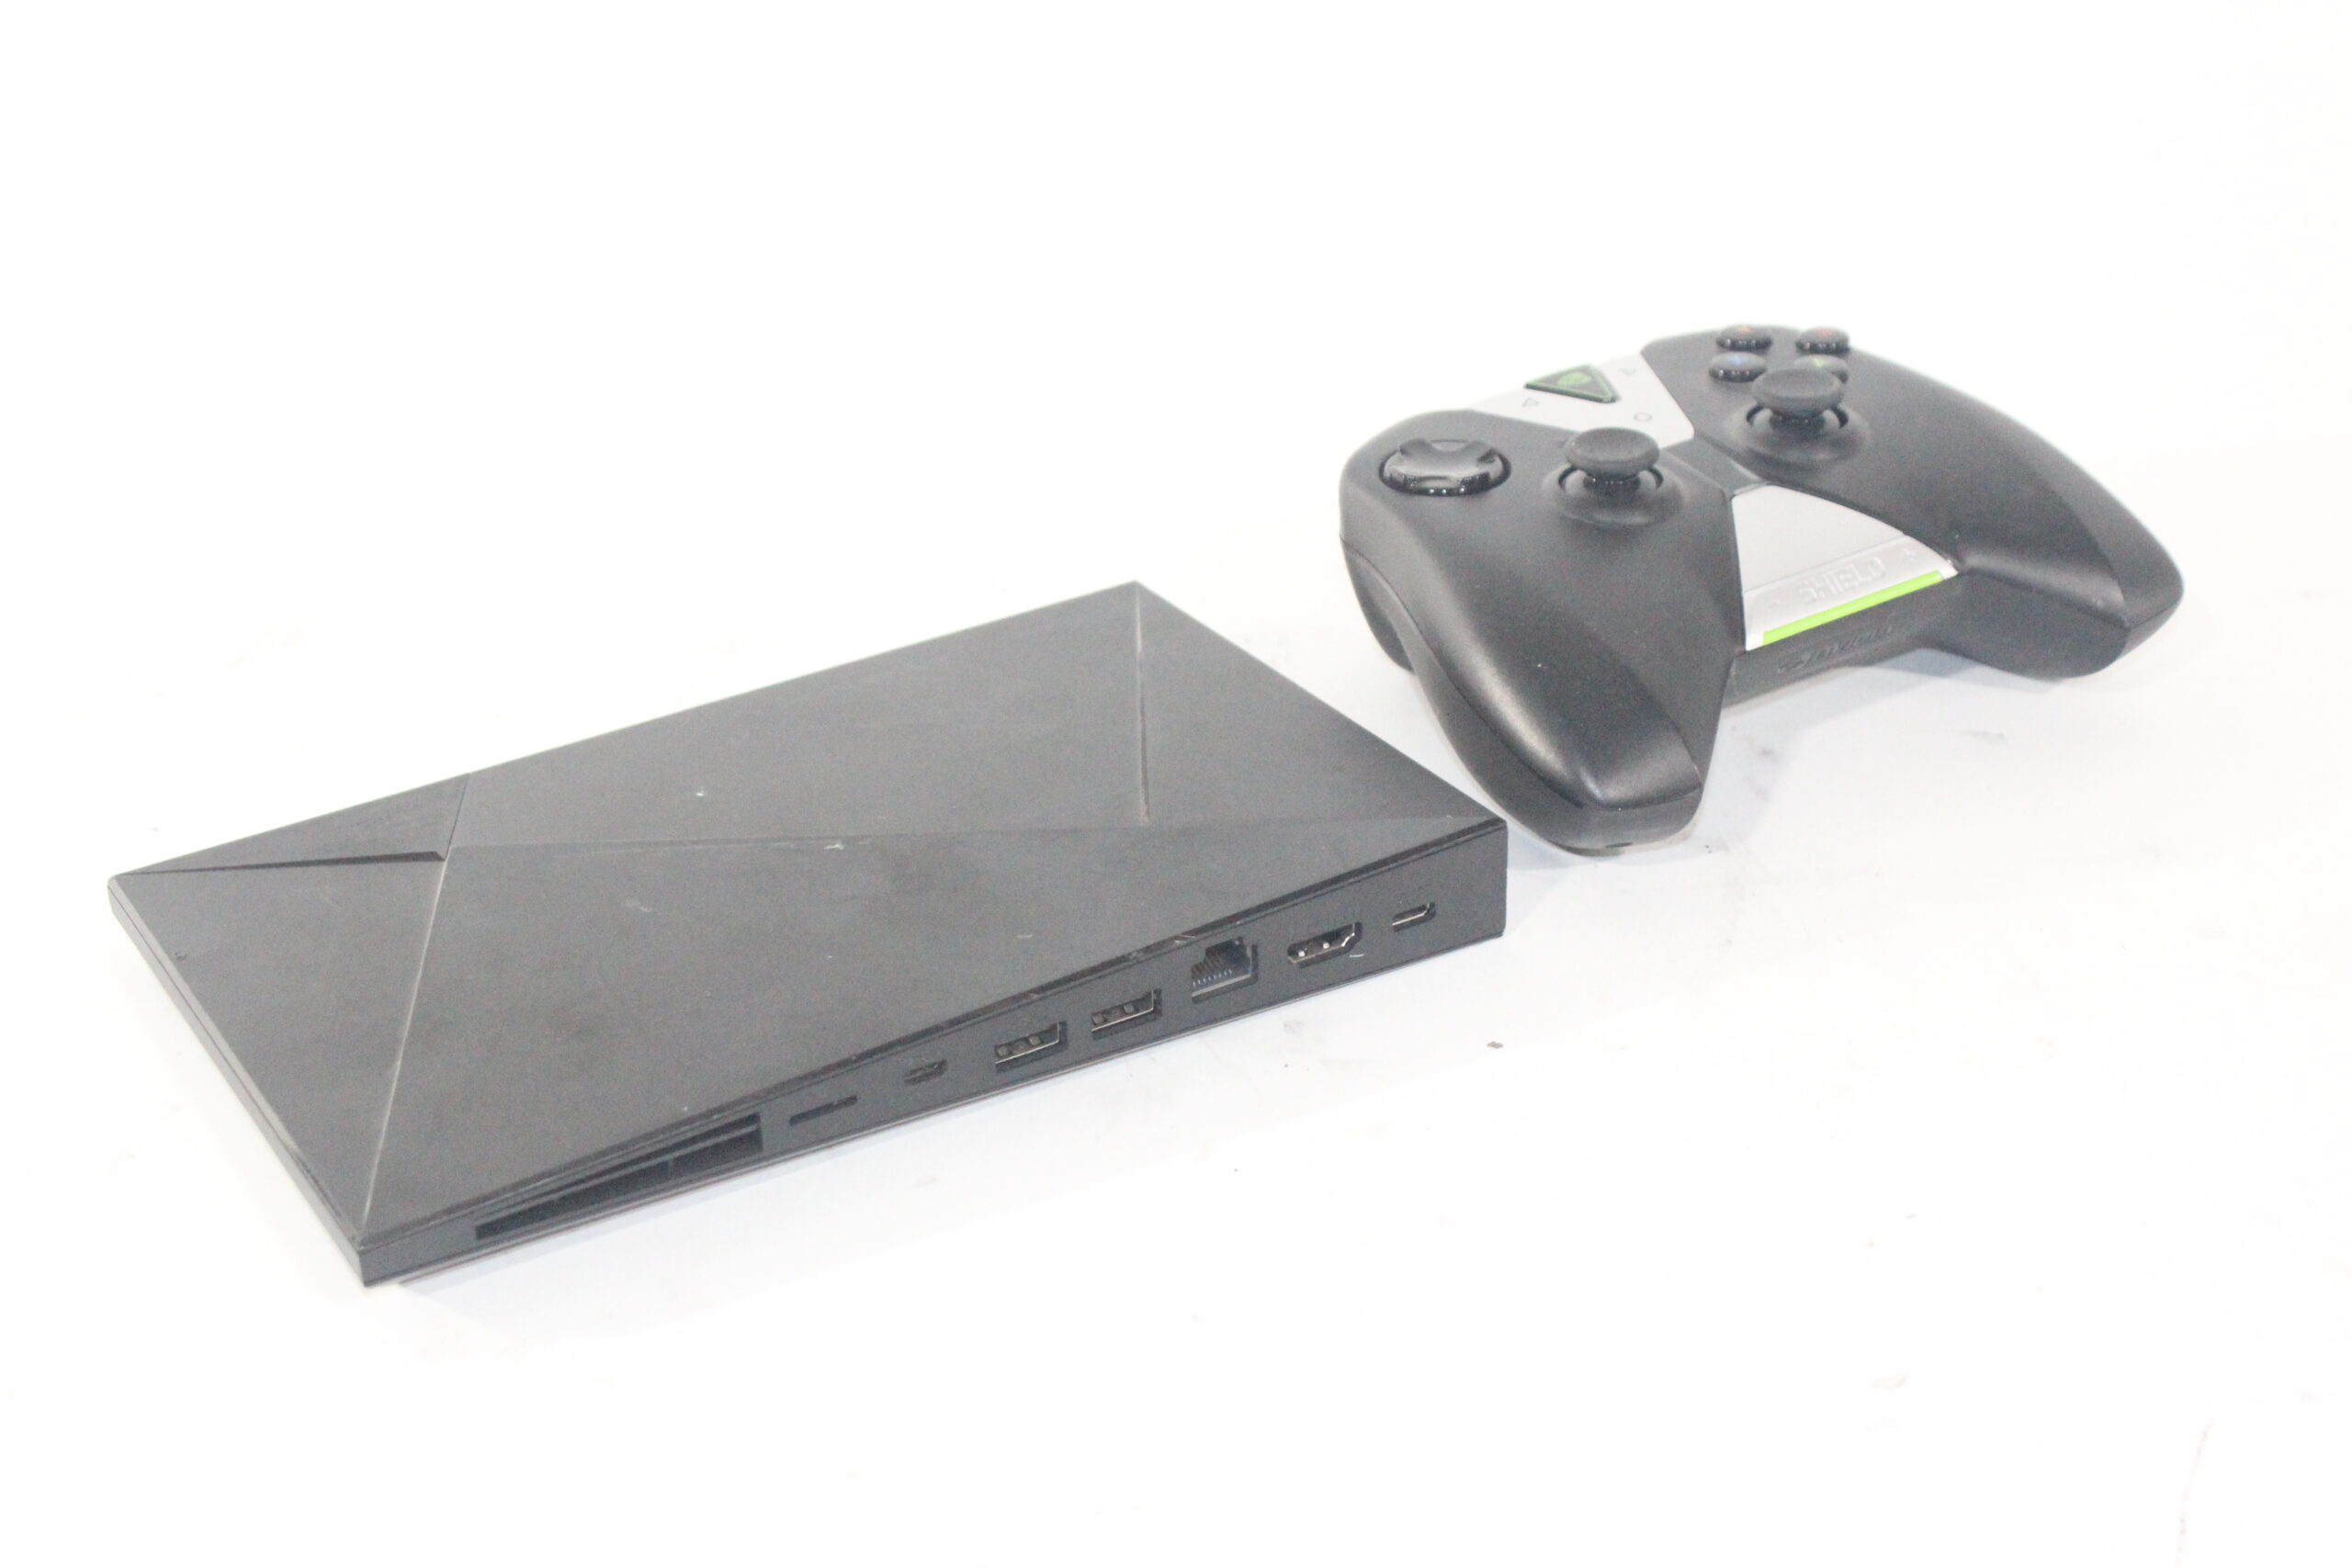 NVIDIA SHIELD TV Gaming Edition Review: An All-in-One Media Device